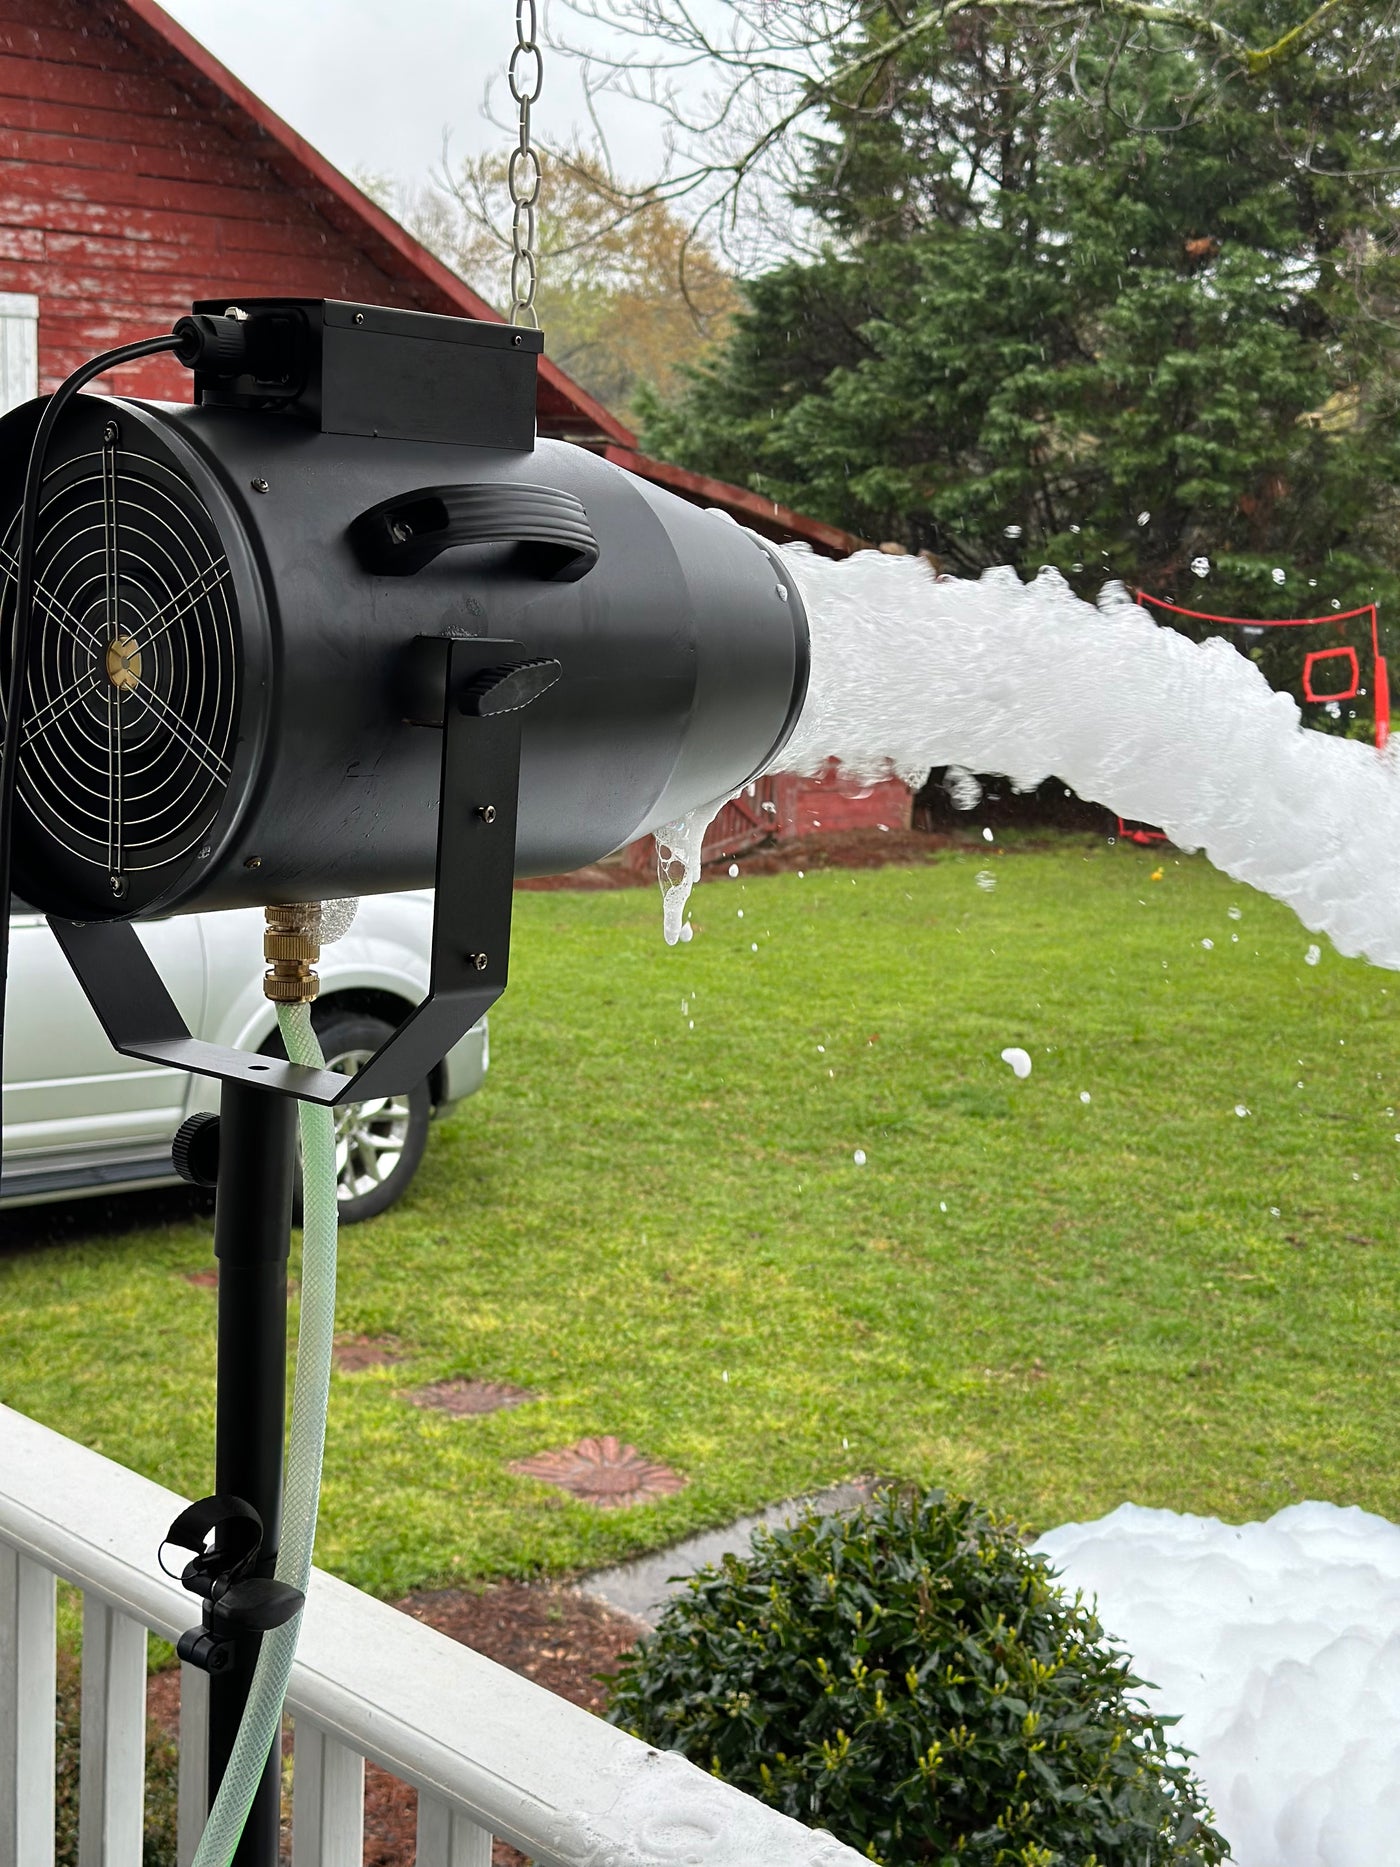 Set the foam cannon on the porch and watch the foam shoot out